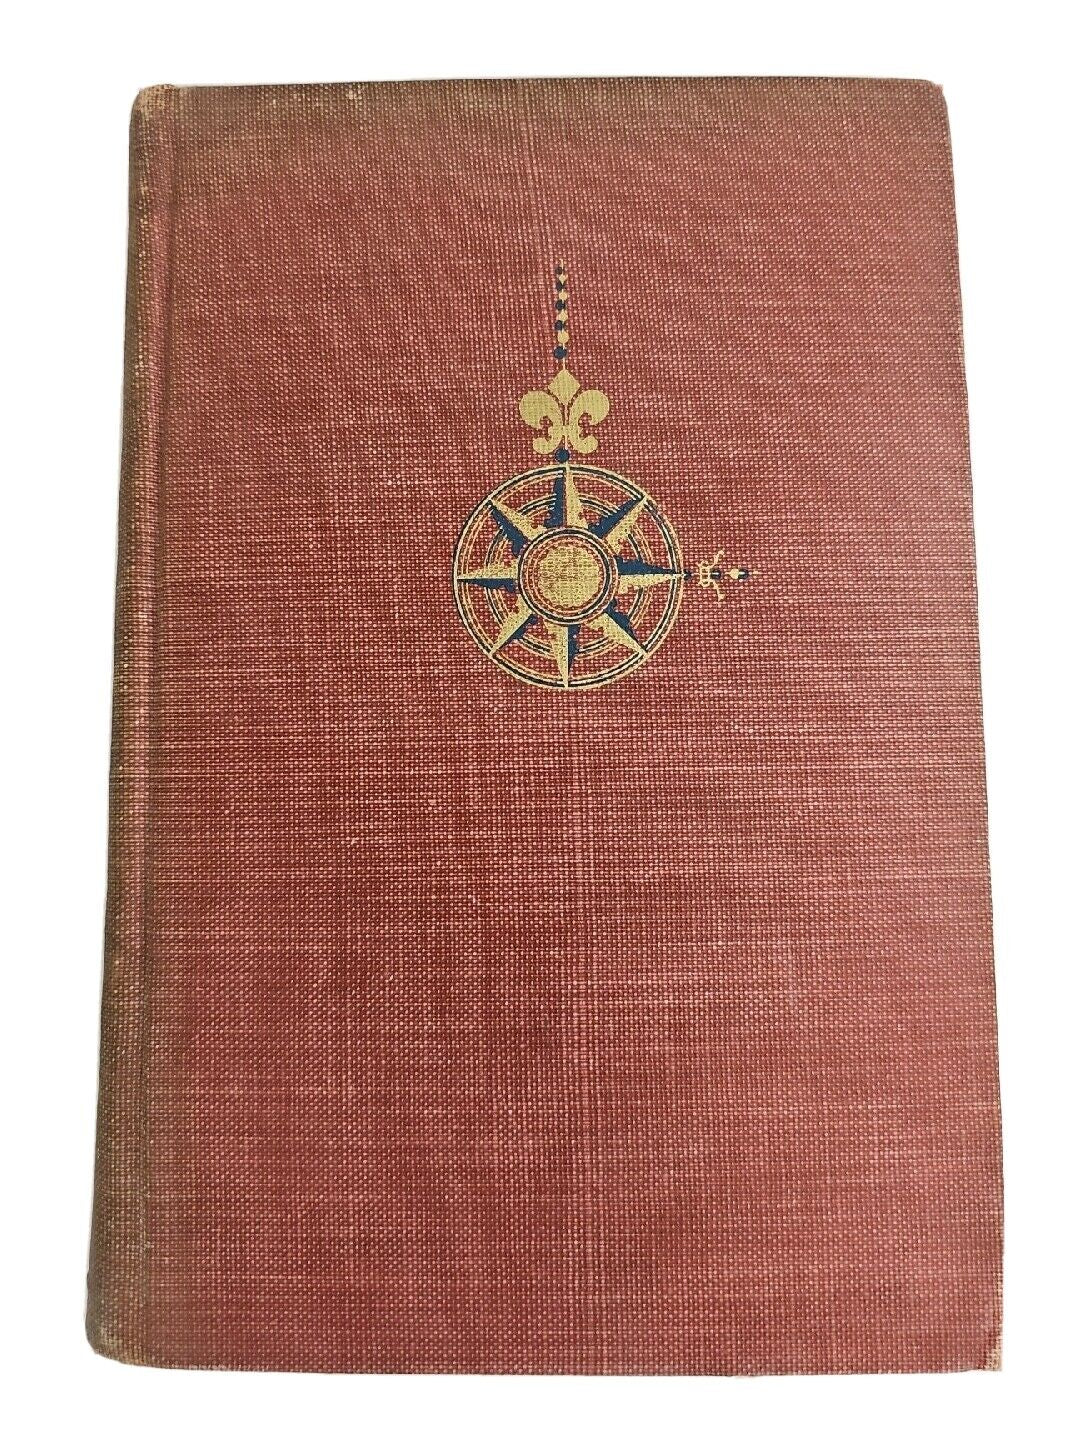 Admiral of the Ocean Sea by Samuel Eliot Morison. Hardcover First Edition 1942